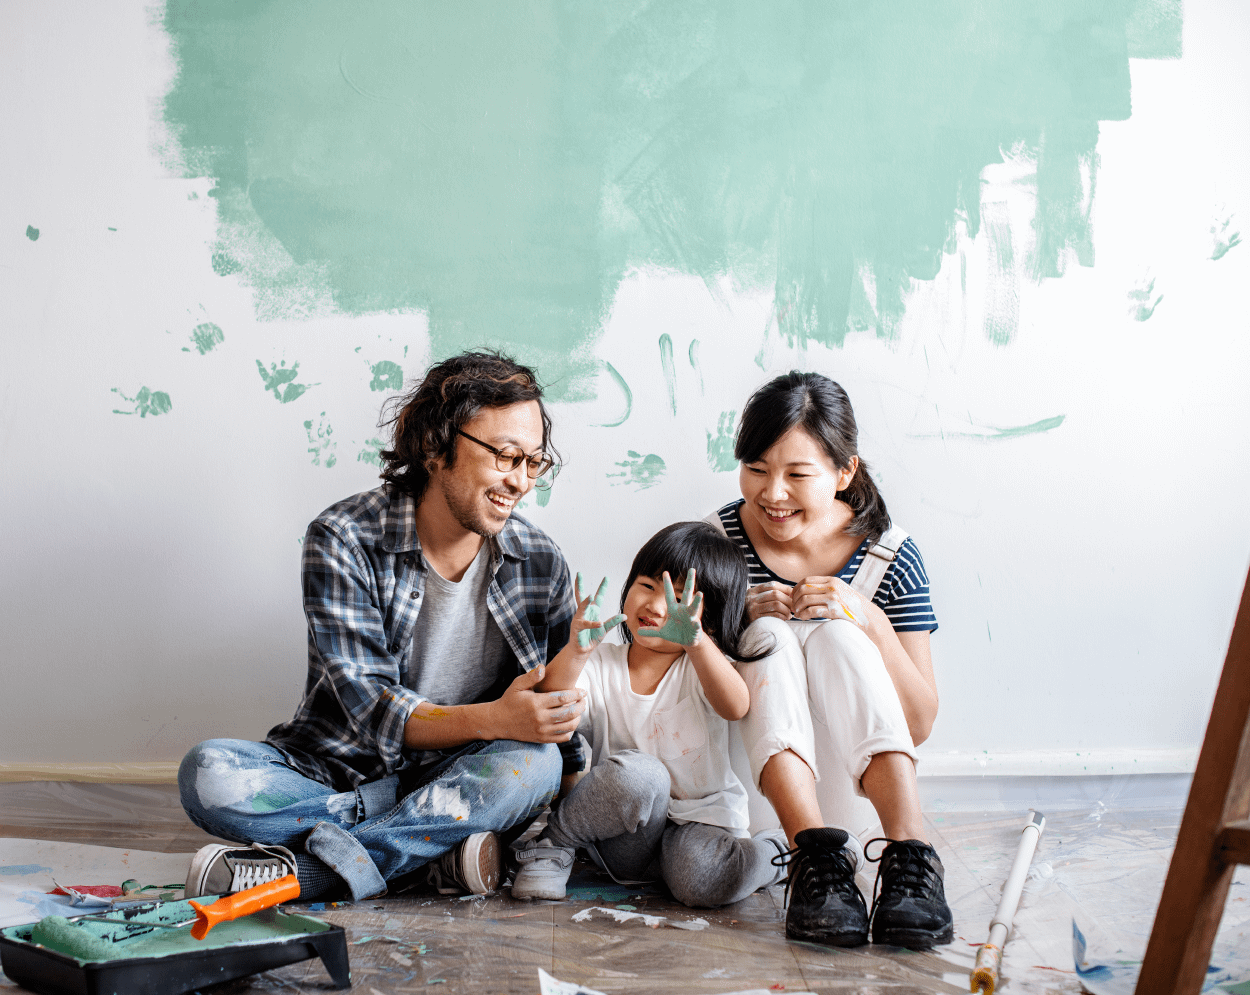 Couple in front of a painted wall in mid-progress smiling with their child, who’s hands are covered in paint